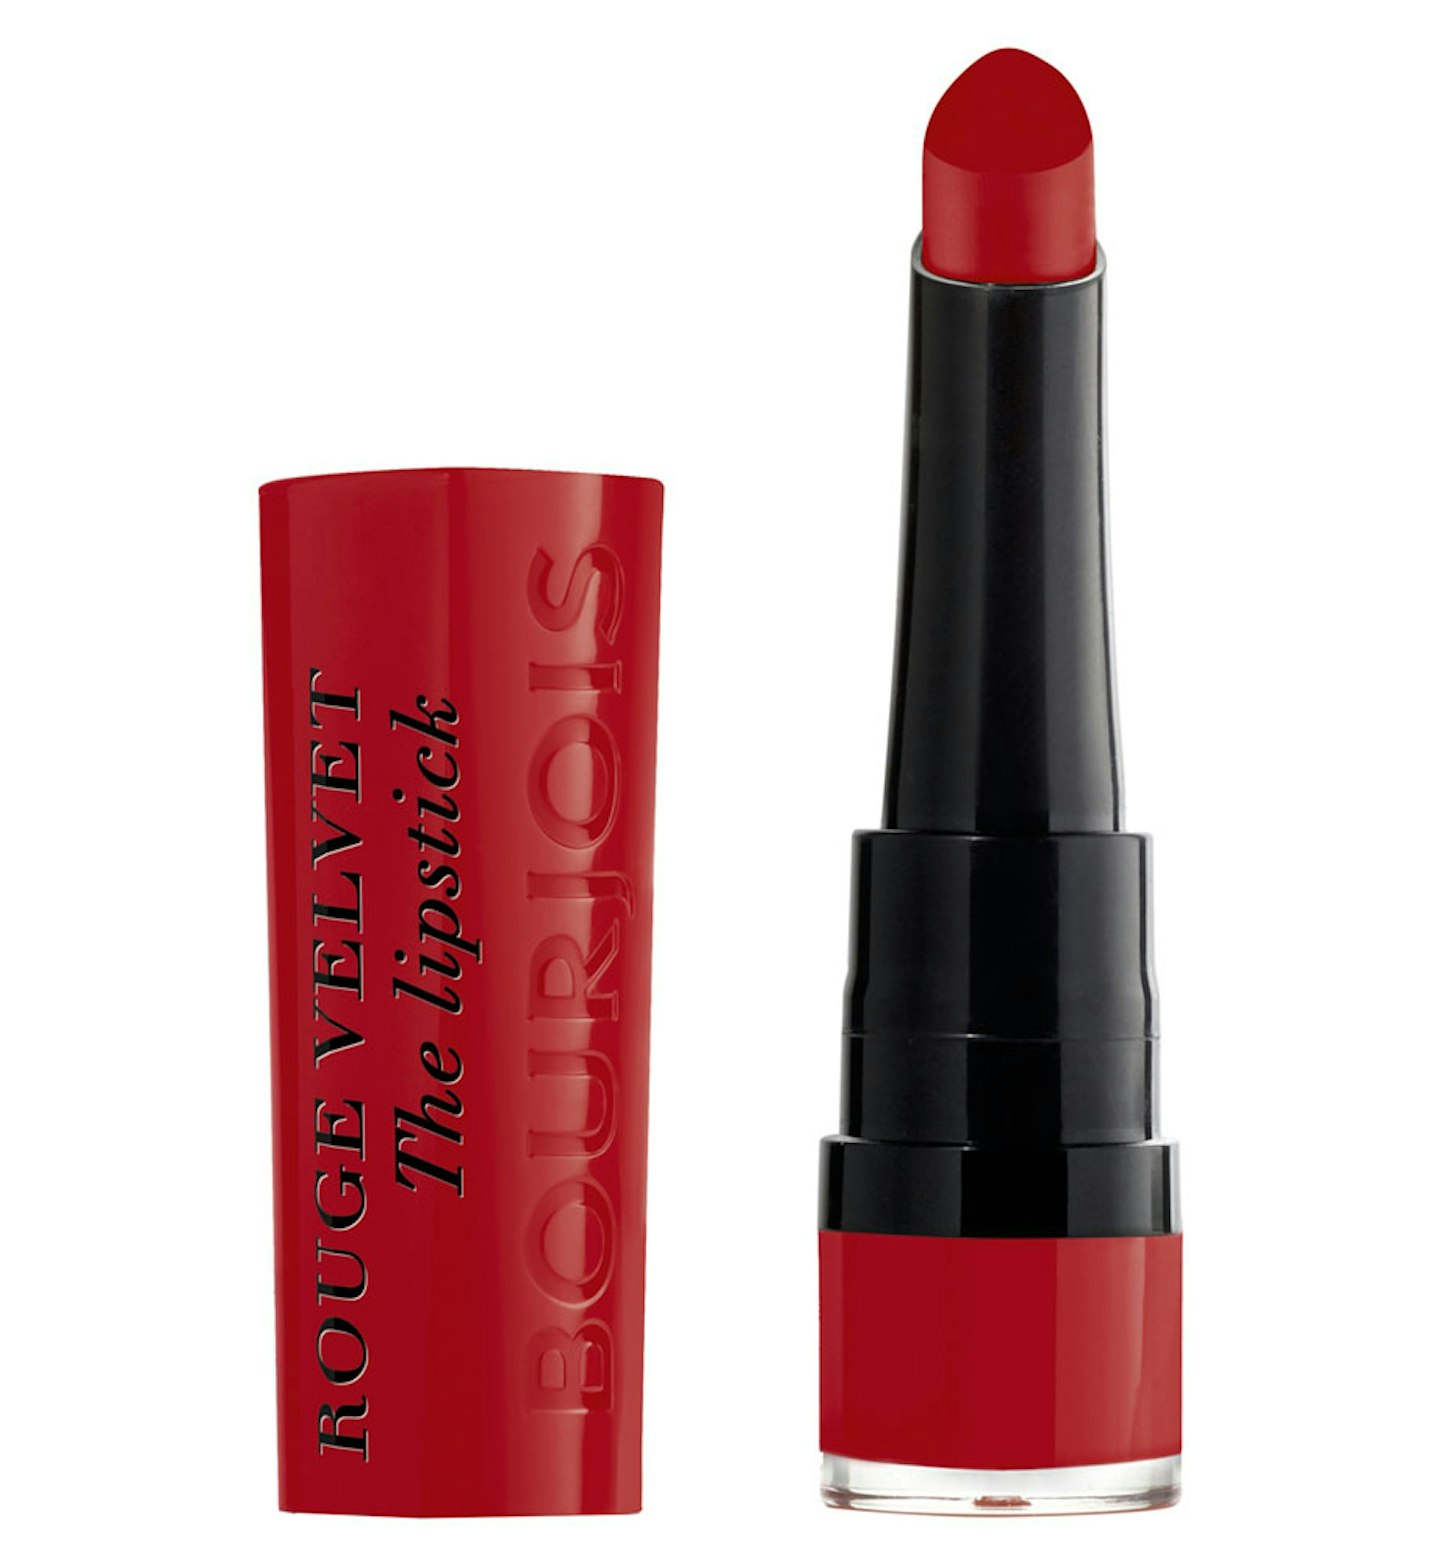 Bourjois Rouge Velvet The Lipstick in Rubis Cute, 8.99 from Boots